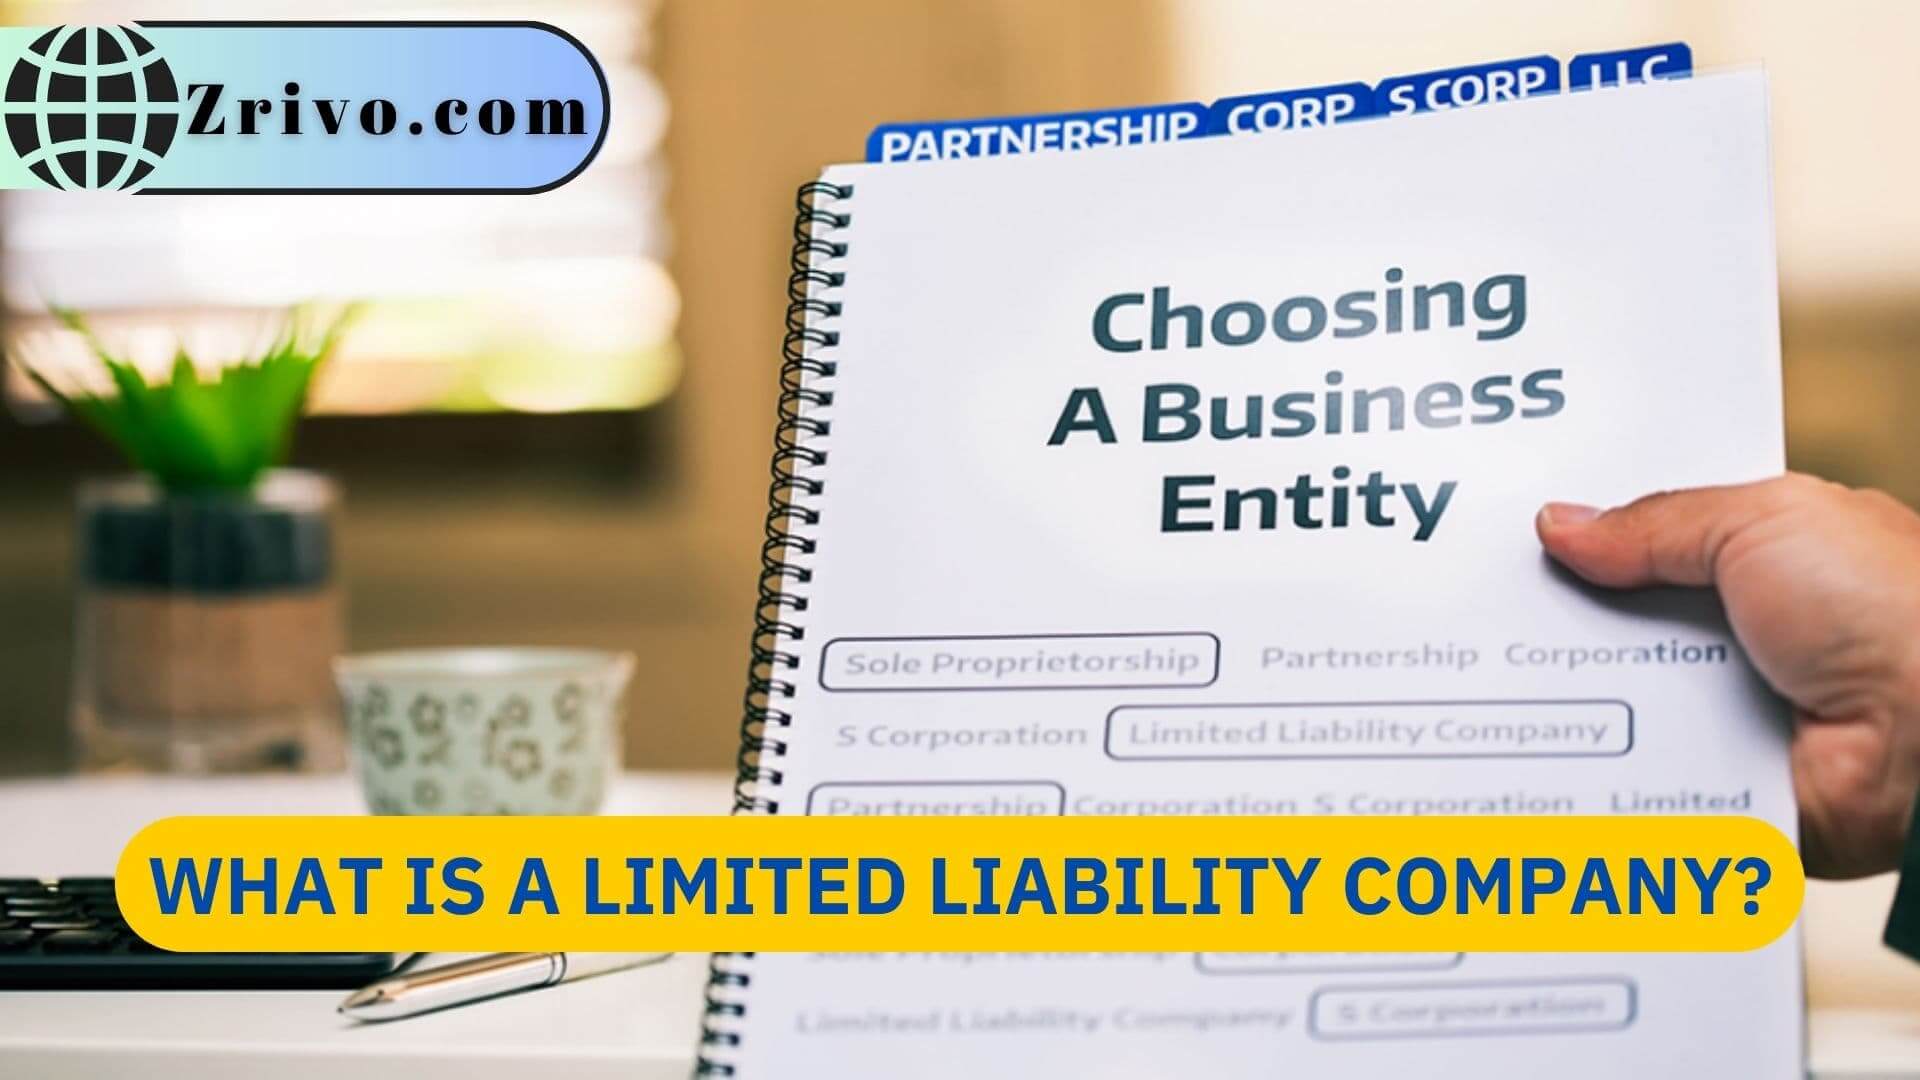 What is a Limited Liability Company?